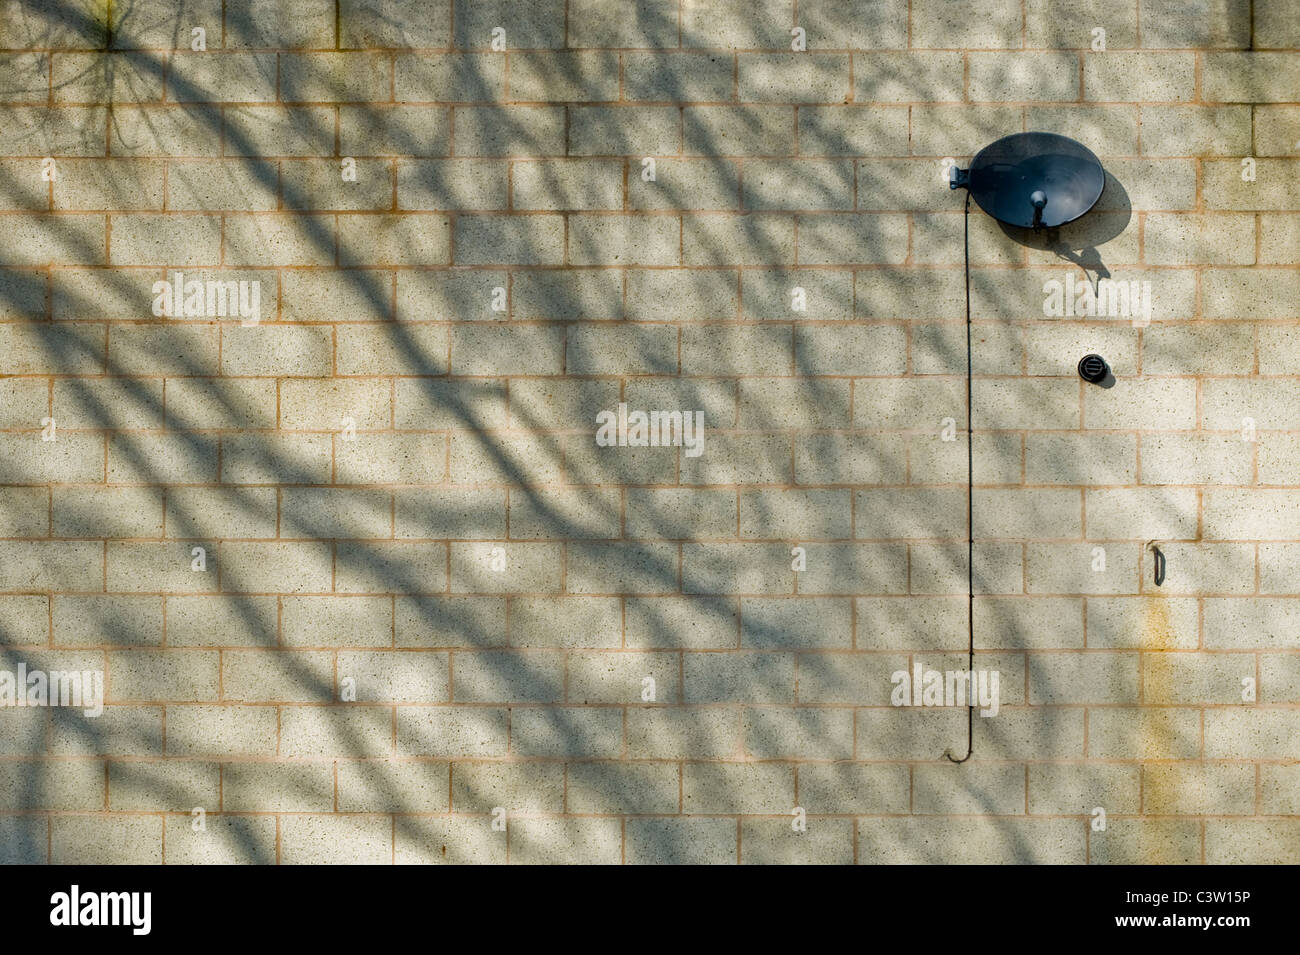 Satellite receiver dish for TV sits installed on a breeze block wall partially shadowed by a leafless tree. Stock Photo